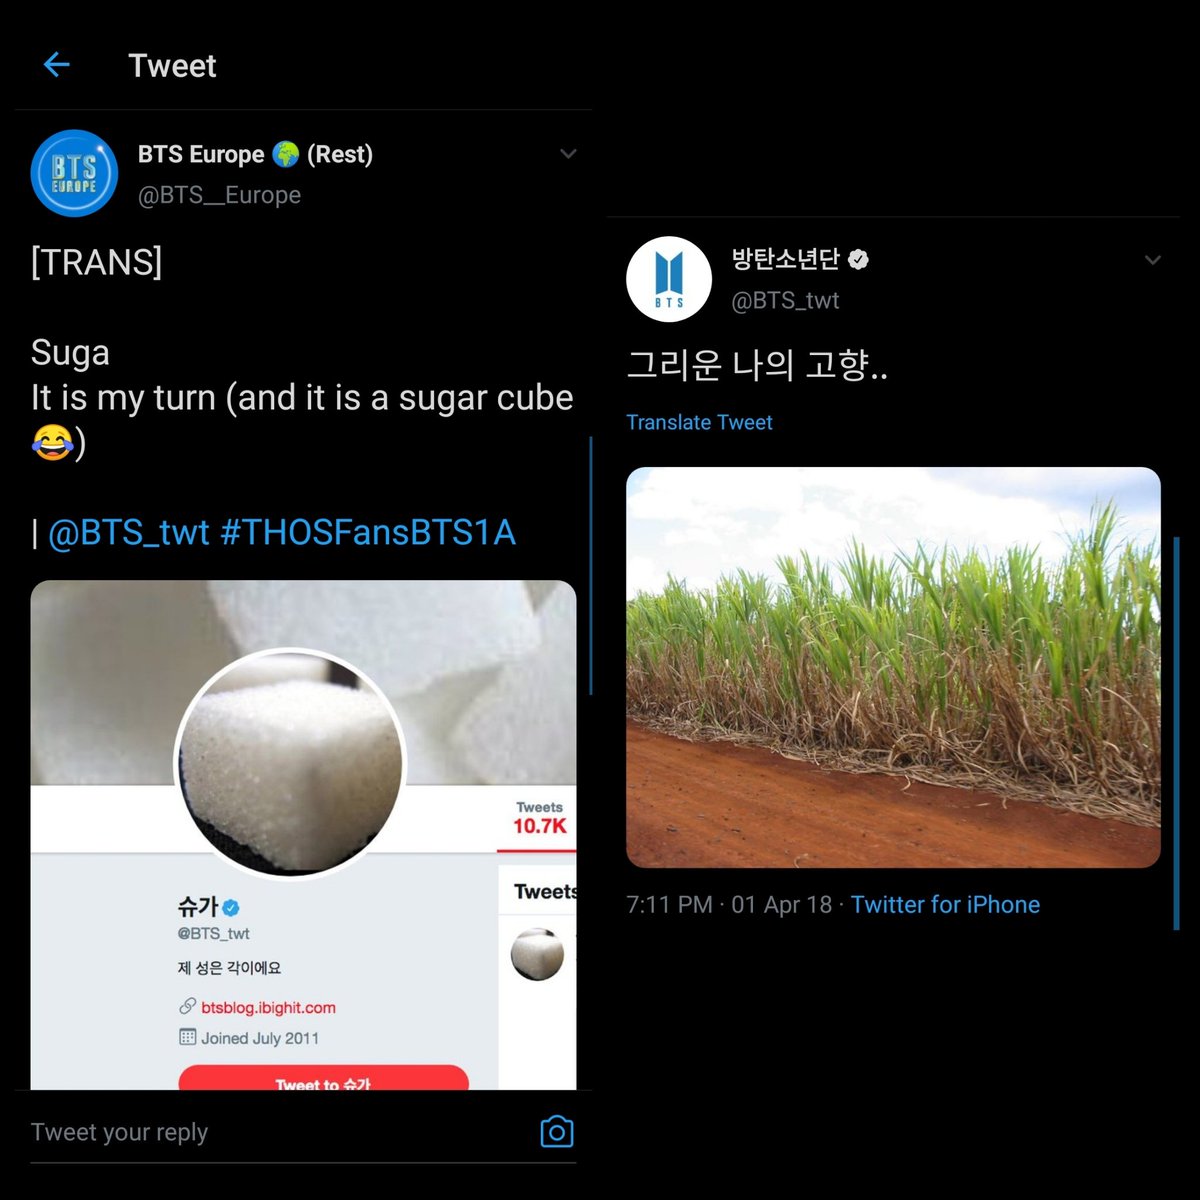 That same day, Yoongi was so cute, he flooded the tl with this sugar cubes pun skshsksksk pls until now I'm still thinking what goes into their mind that time